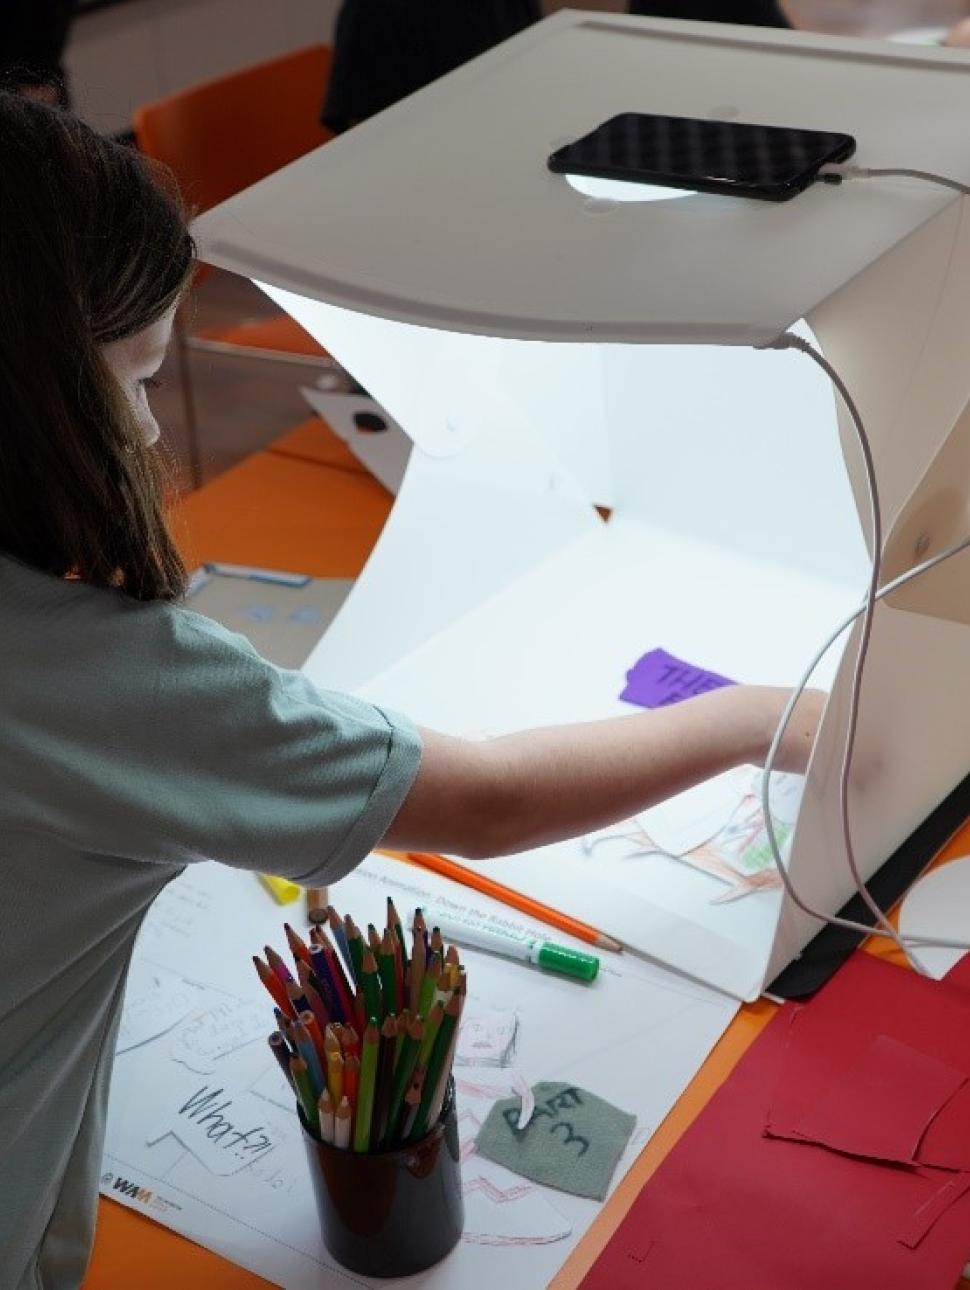 This image shows a girl setting up a scene for her stop animation film.